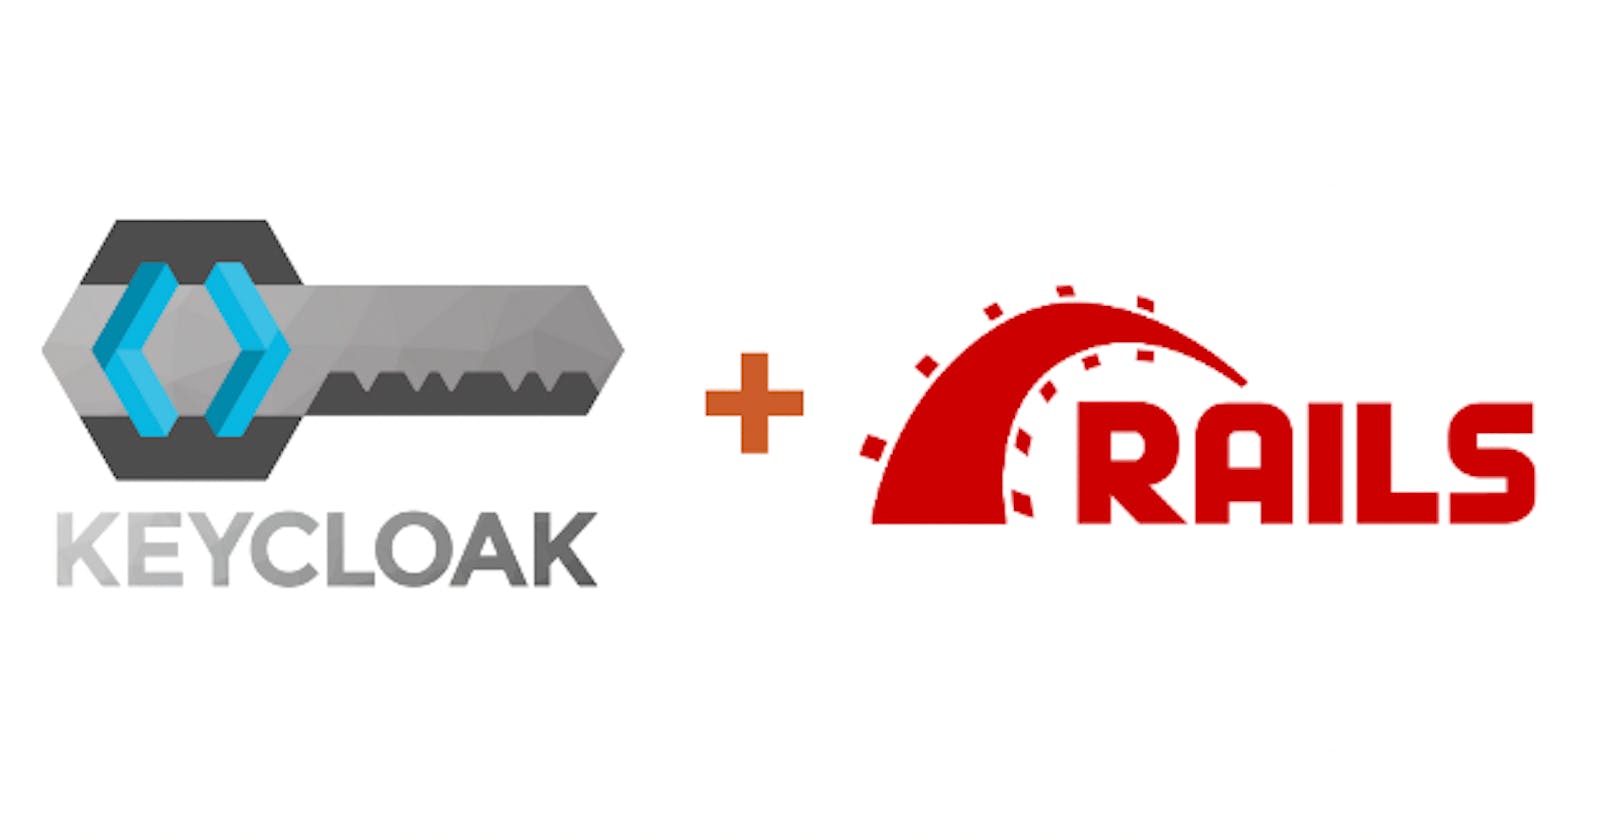 How to implement OpenID authorization in Keycloak server for Rails application.